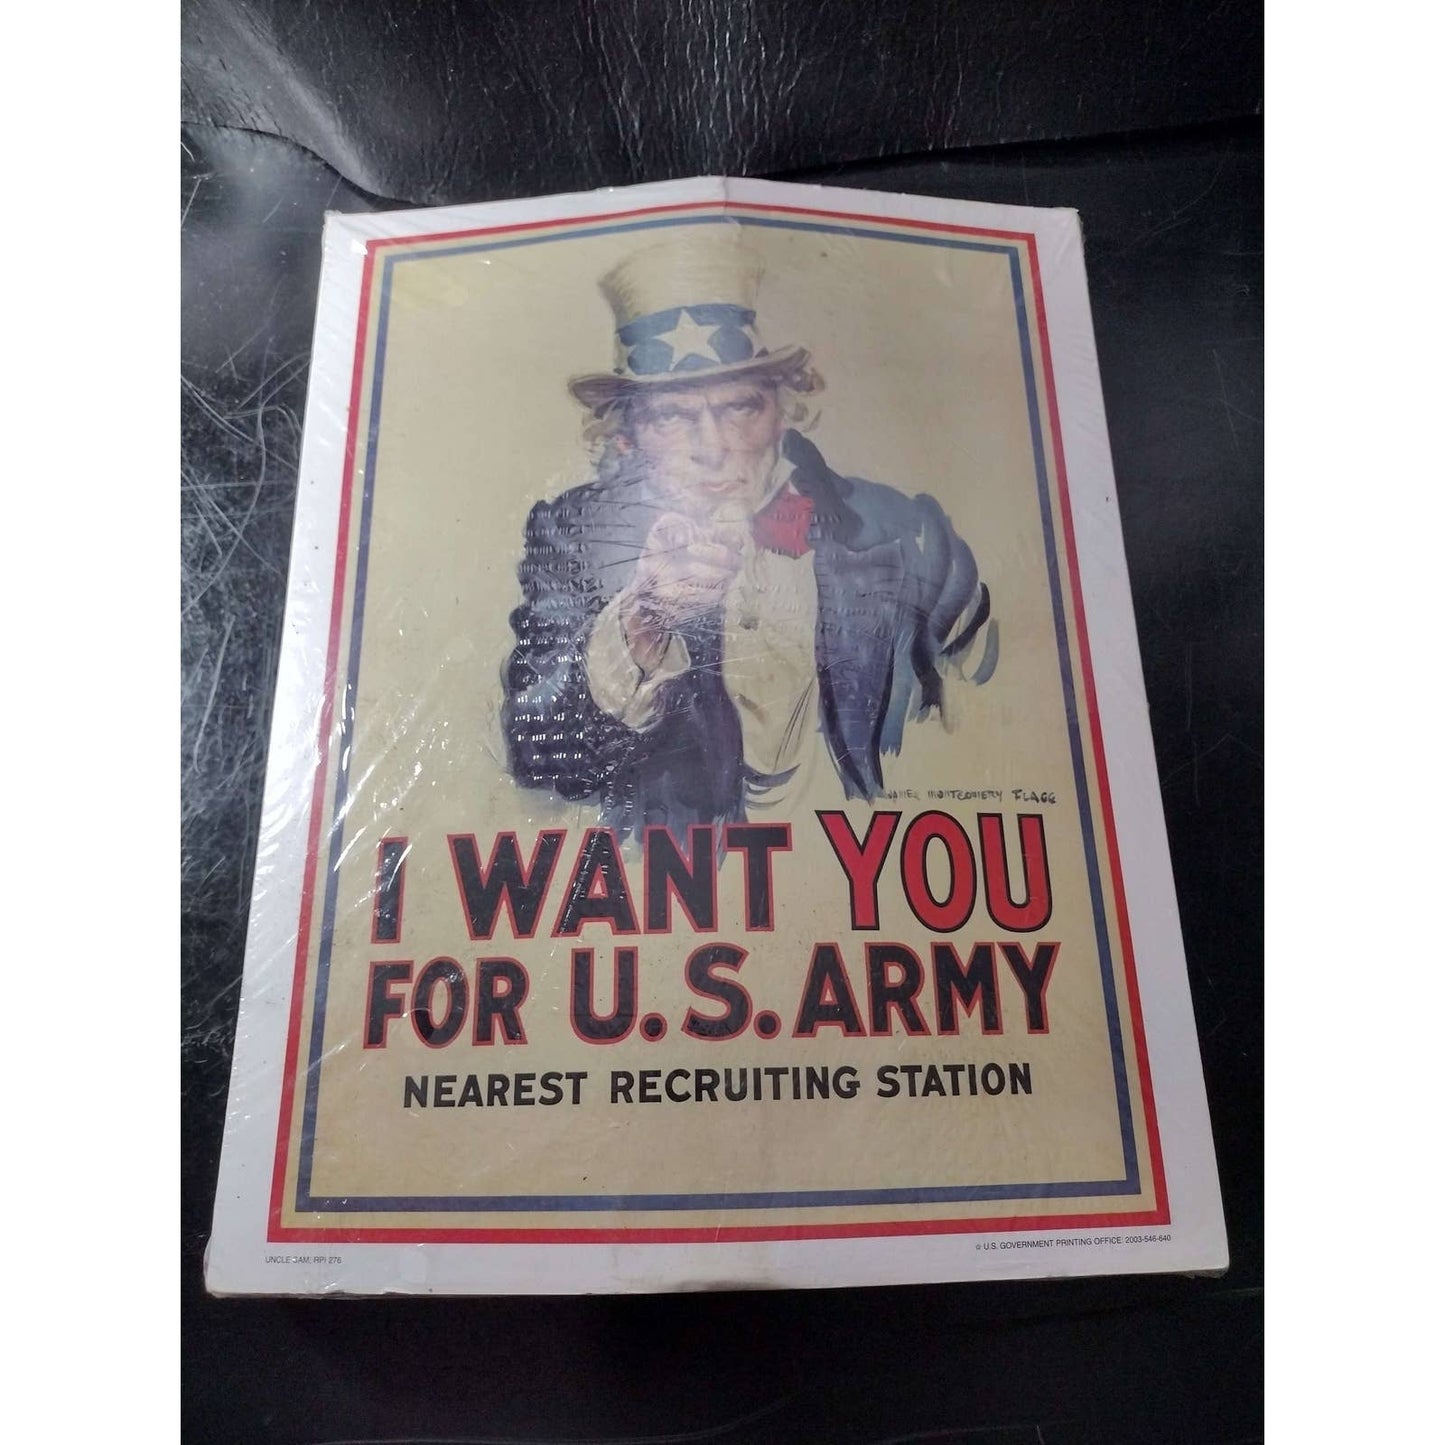 US Army "I Want You" Uncle Sam Genuine Recruiting Poster Stand Up! | FREE Shipping | US Army